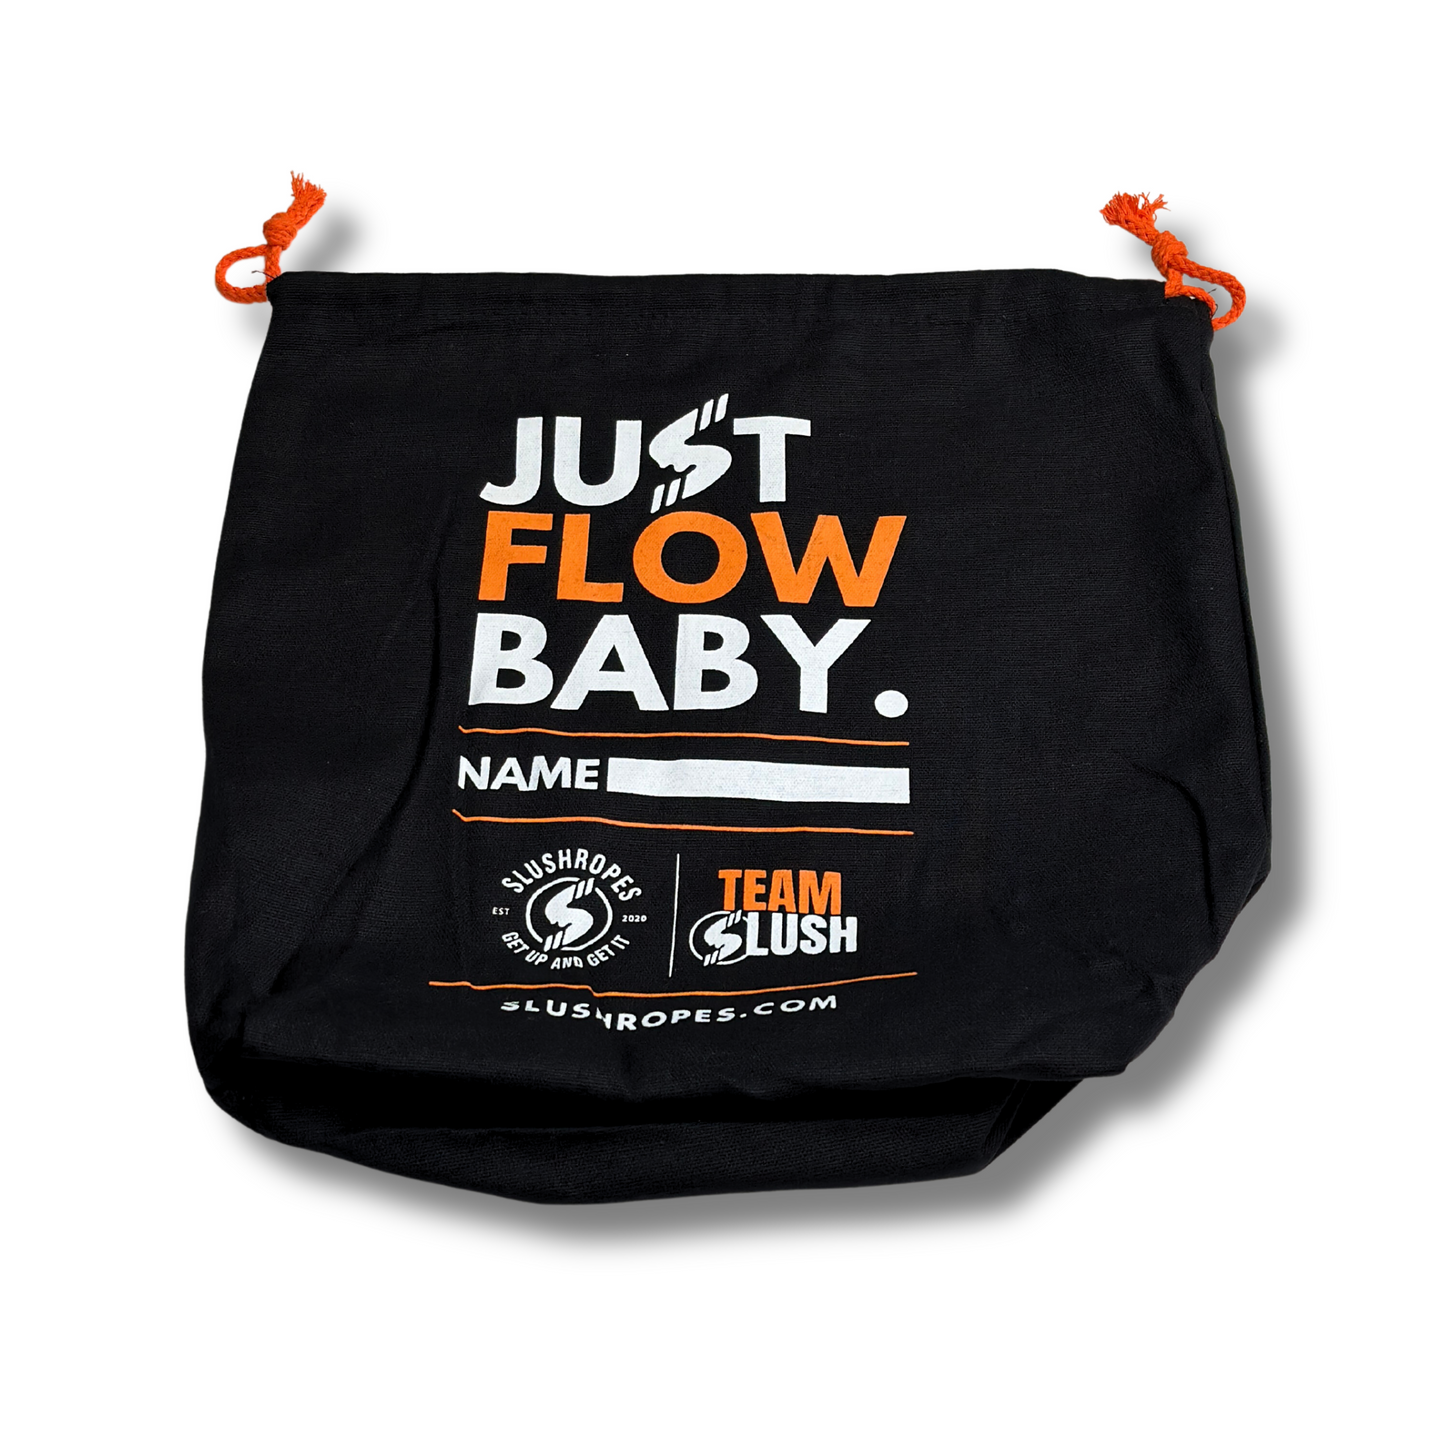 JUST FLOW BABY ROPE + ACCESSORY BAG